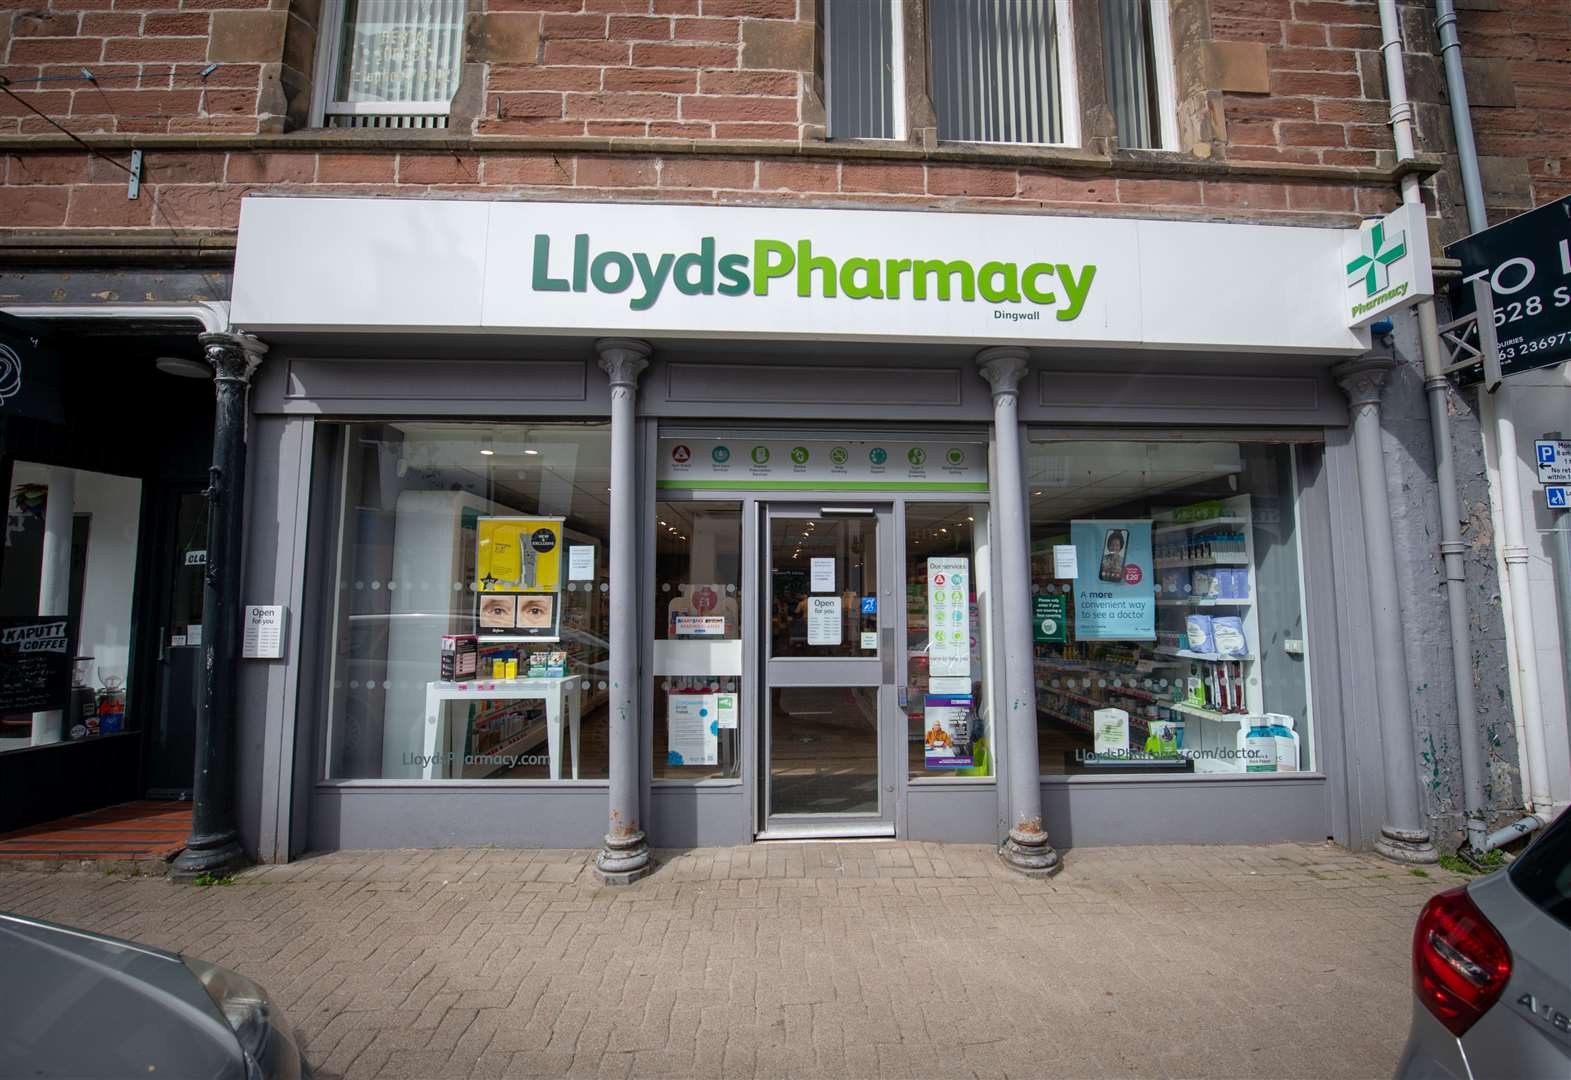 Lloyds Pharmacy on the High Street in Dingwall is actively recruiting for a full-time pharmacist amid a national shortage.